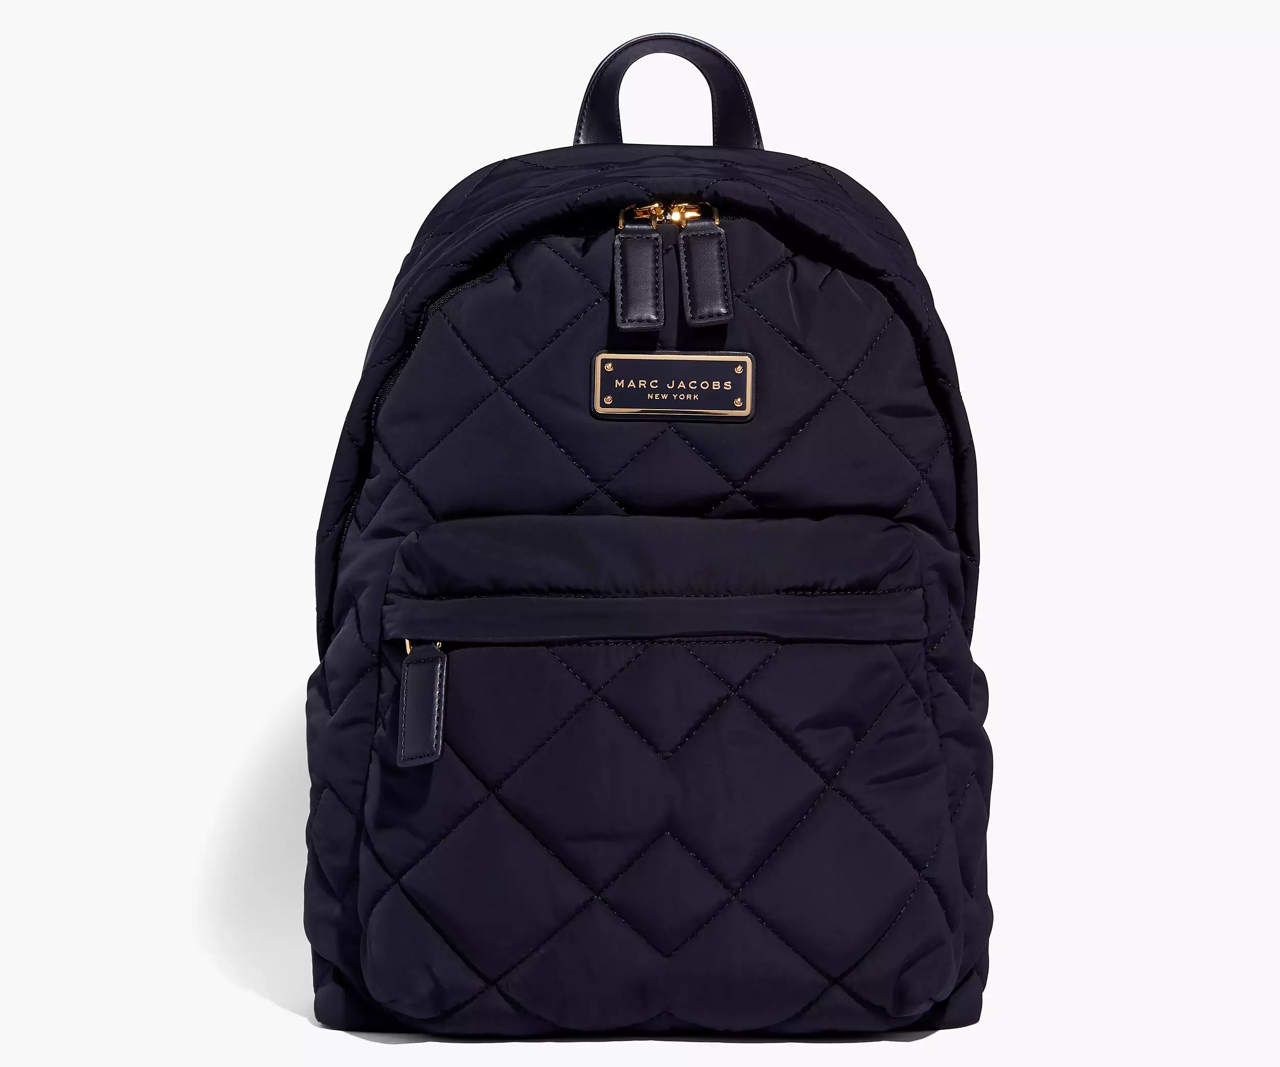 MJ Quilted Nylon Backpack in Black (M0011321-001)